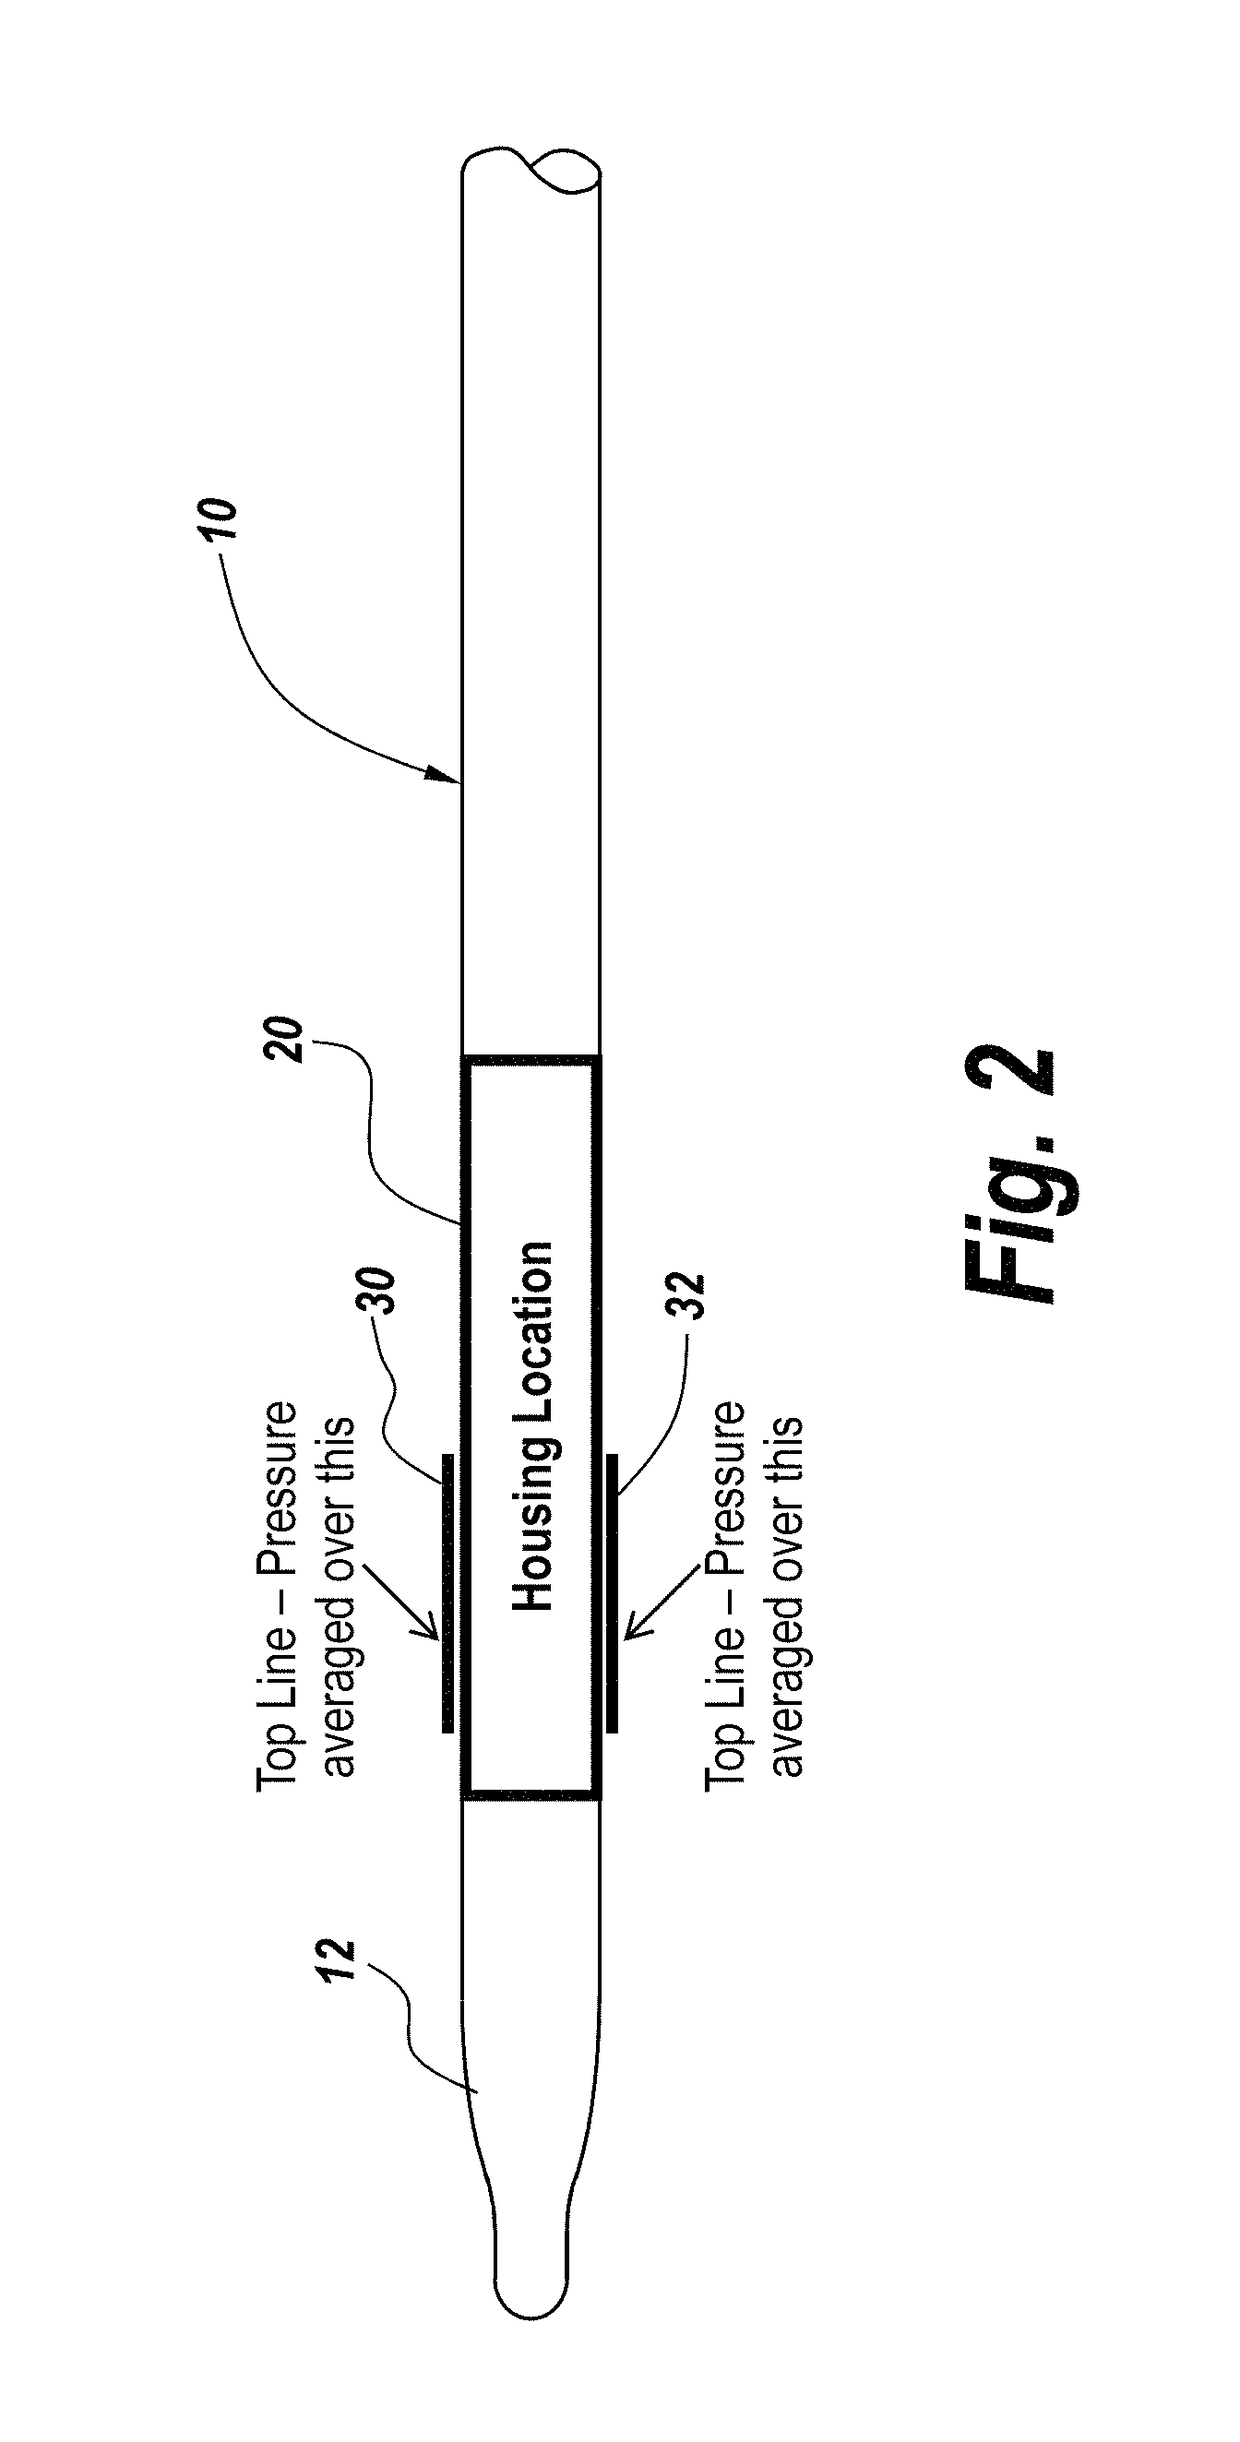 Method and system of measurement of mach and dynamic pressure using internal sensors